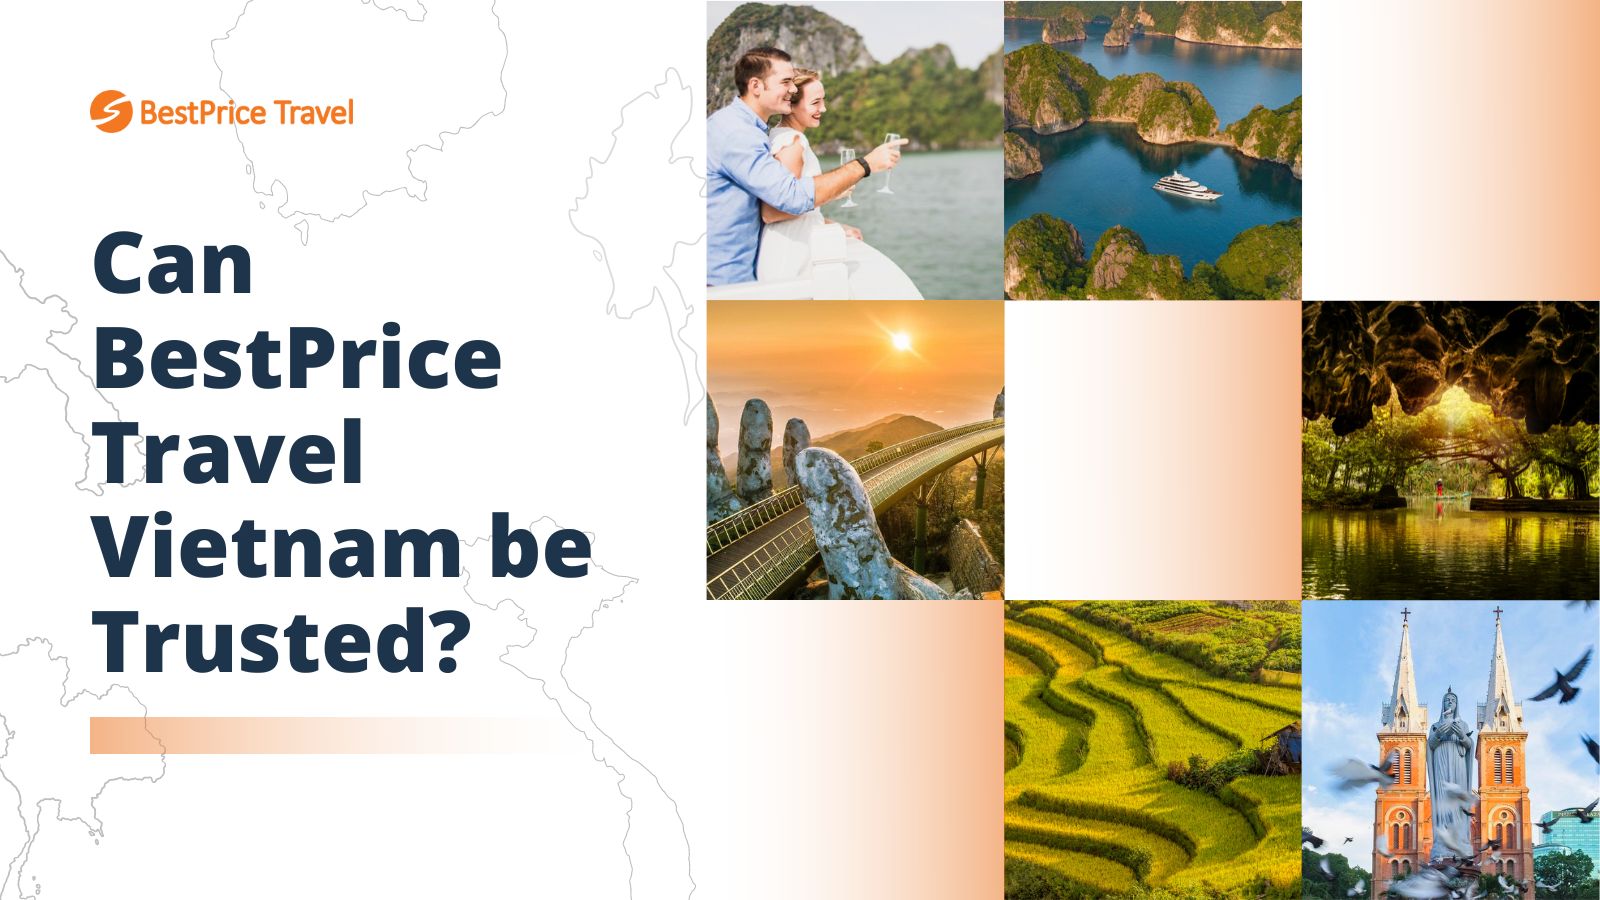 Can BestPrice Travel Vietnam be trusted?